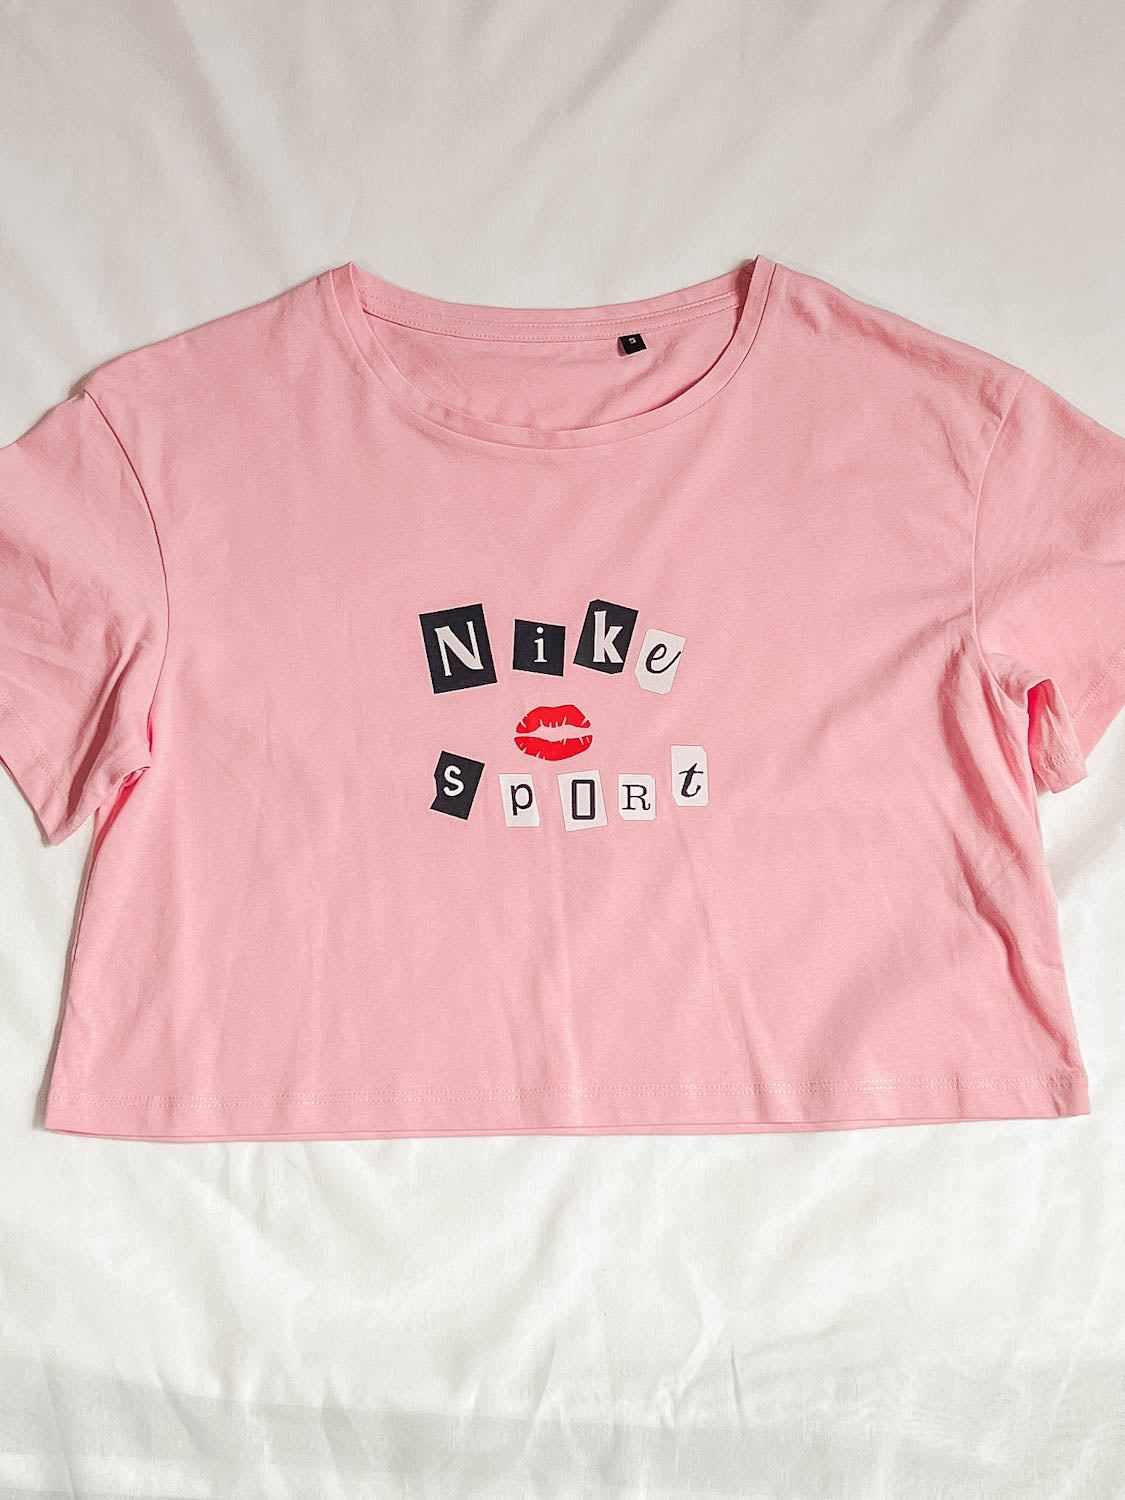 ONE OF/SALE - Nikki Sport Cropped T-Shirt Pink S Out The Purse